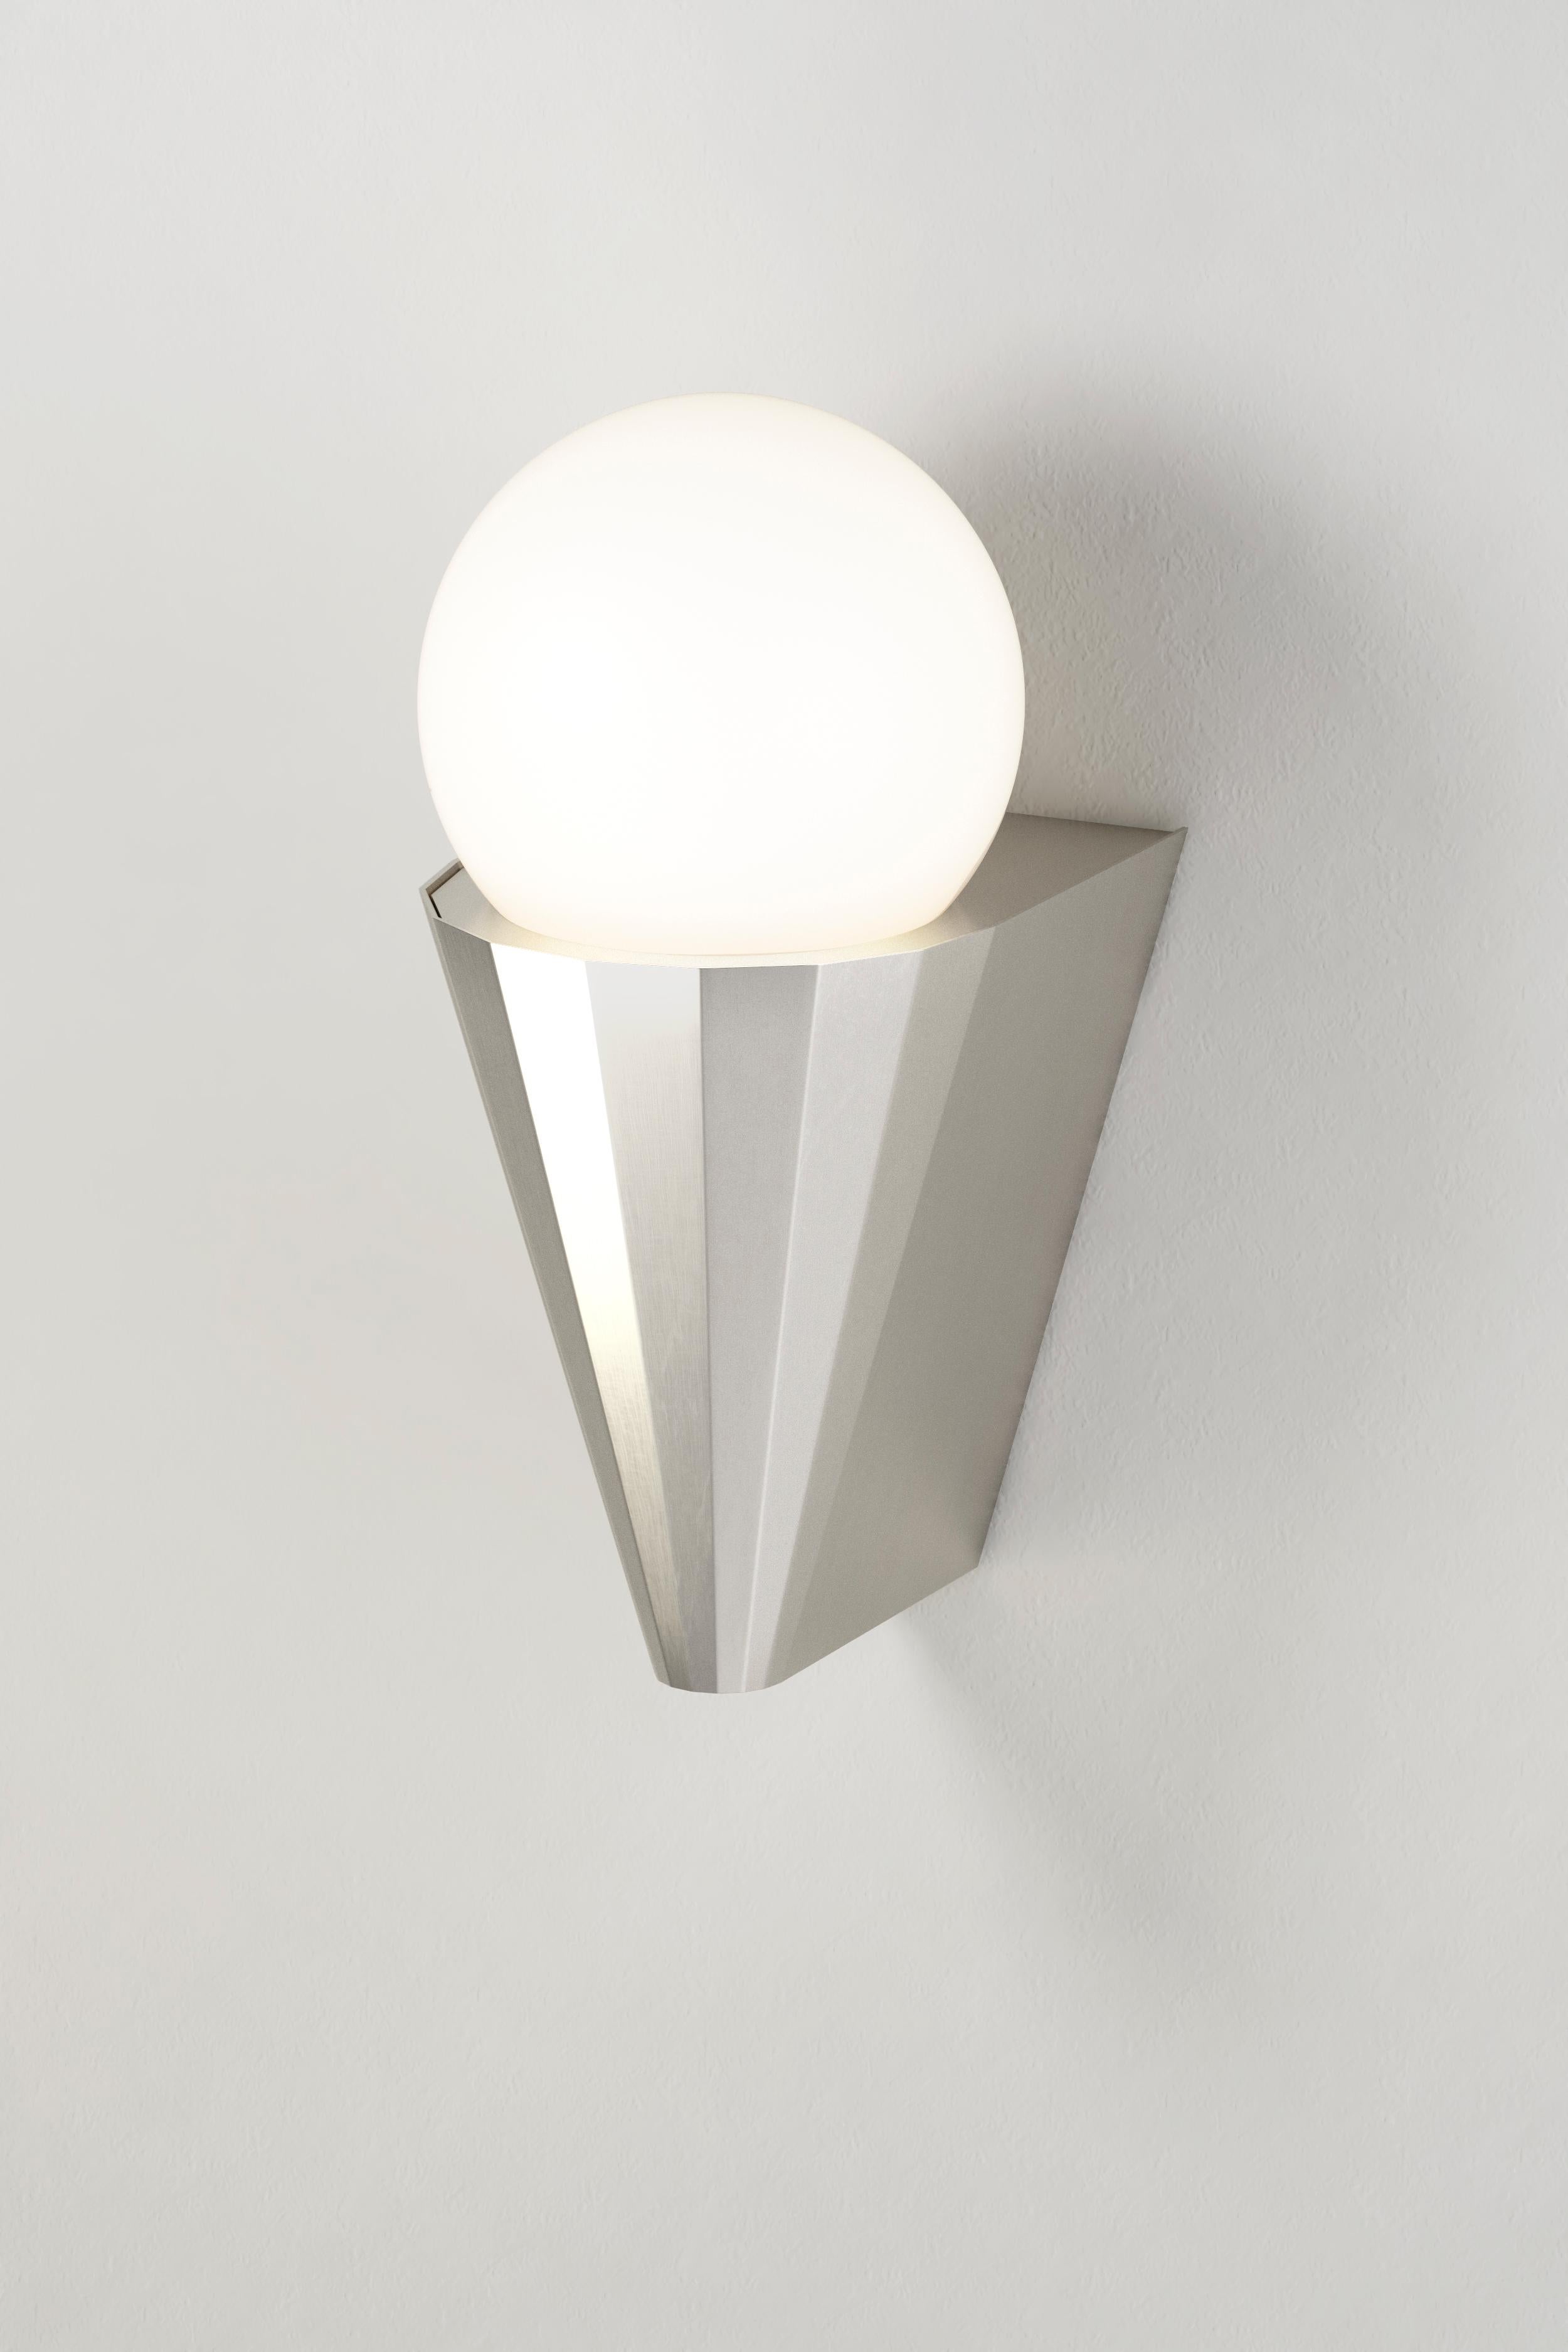 IP cornet satin nickel wall light by Emilie Cathelineau
Dimensions: D 10 x W 12.5 x H 21.2 cm
Materials: solid brass, satin nickel
Others finishes are available

All our lamps can be wired according to each country. If sold to the USA it will